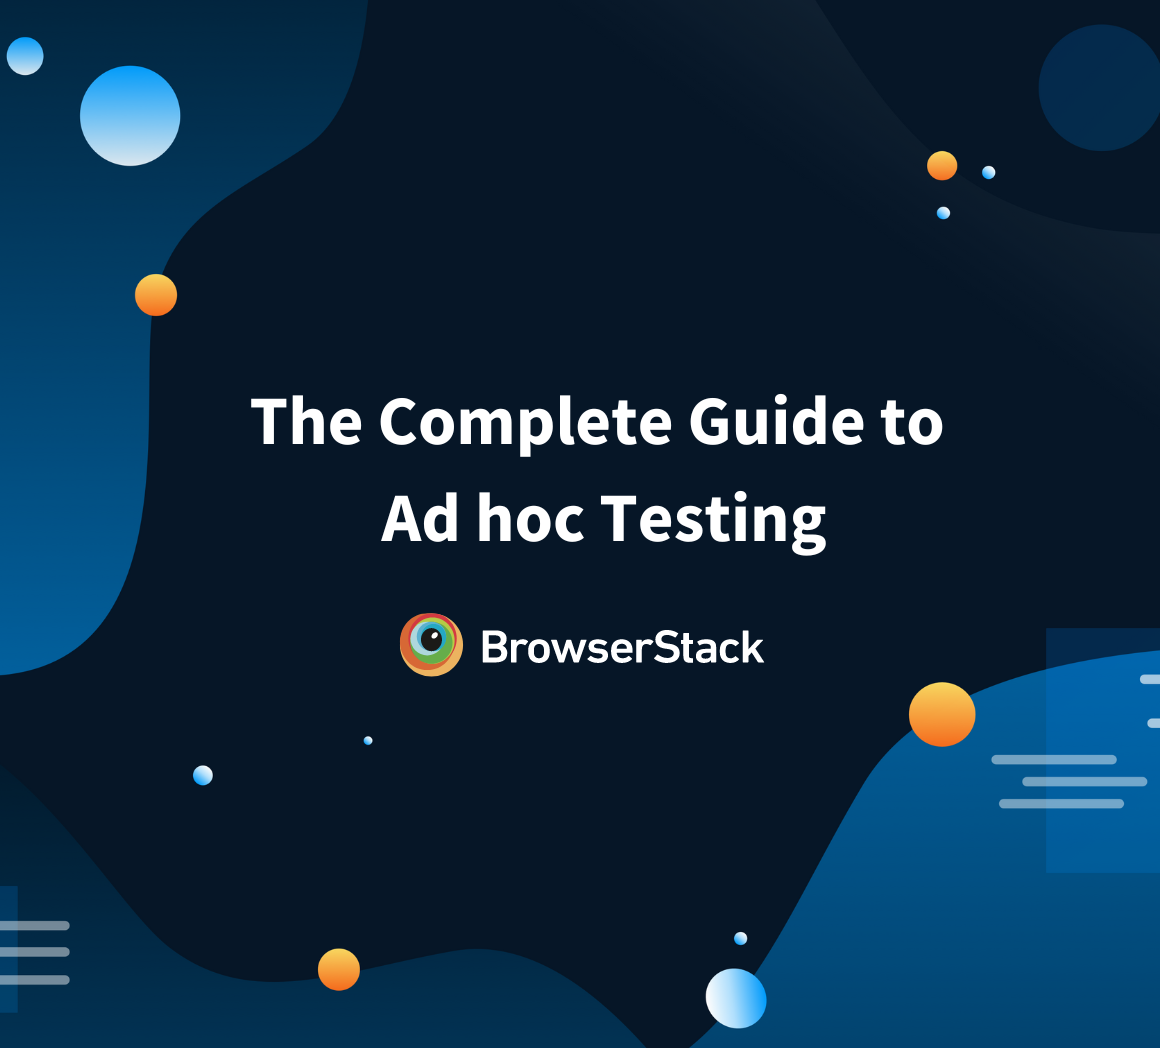 The Complete Guide to Ad hoc Testing